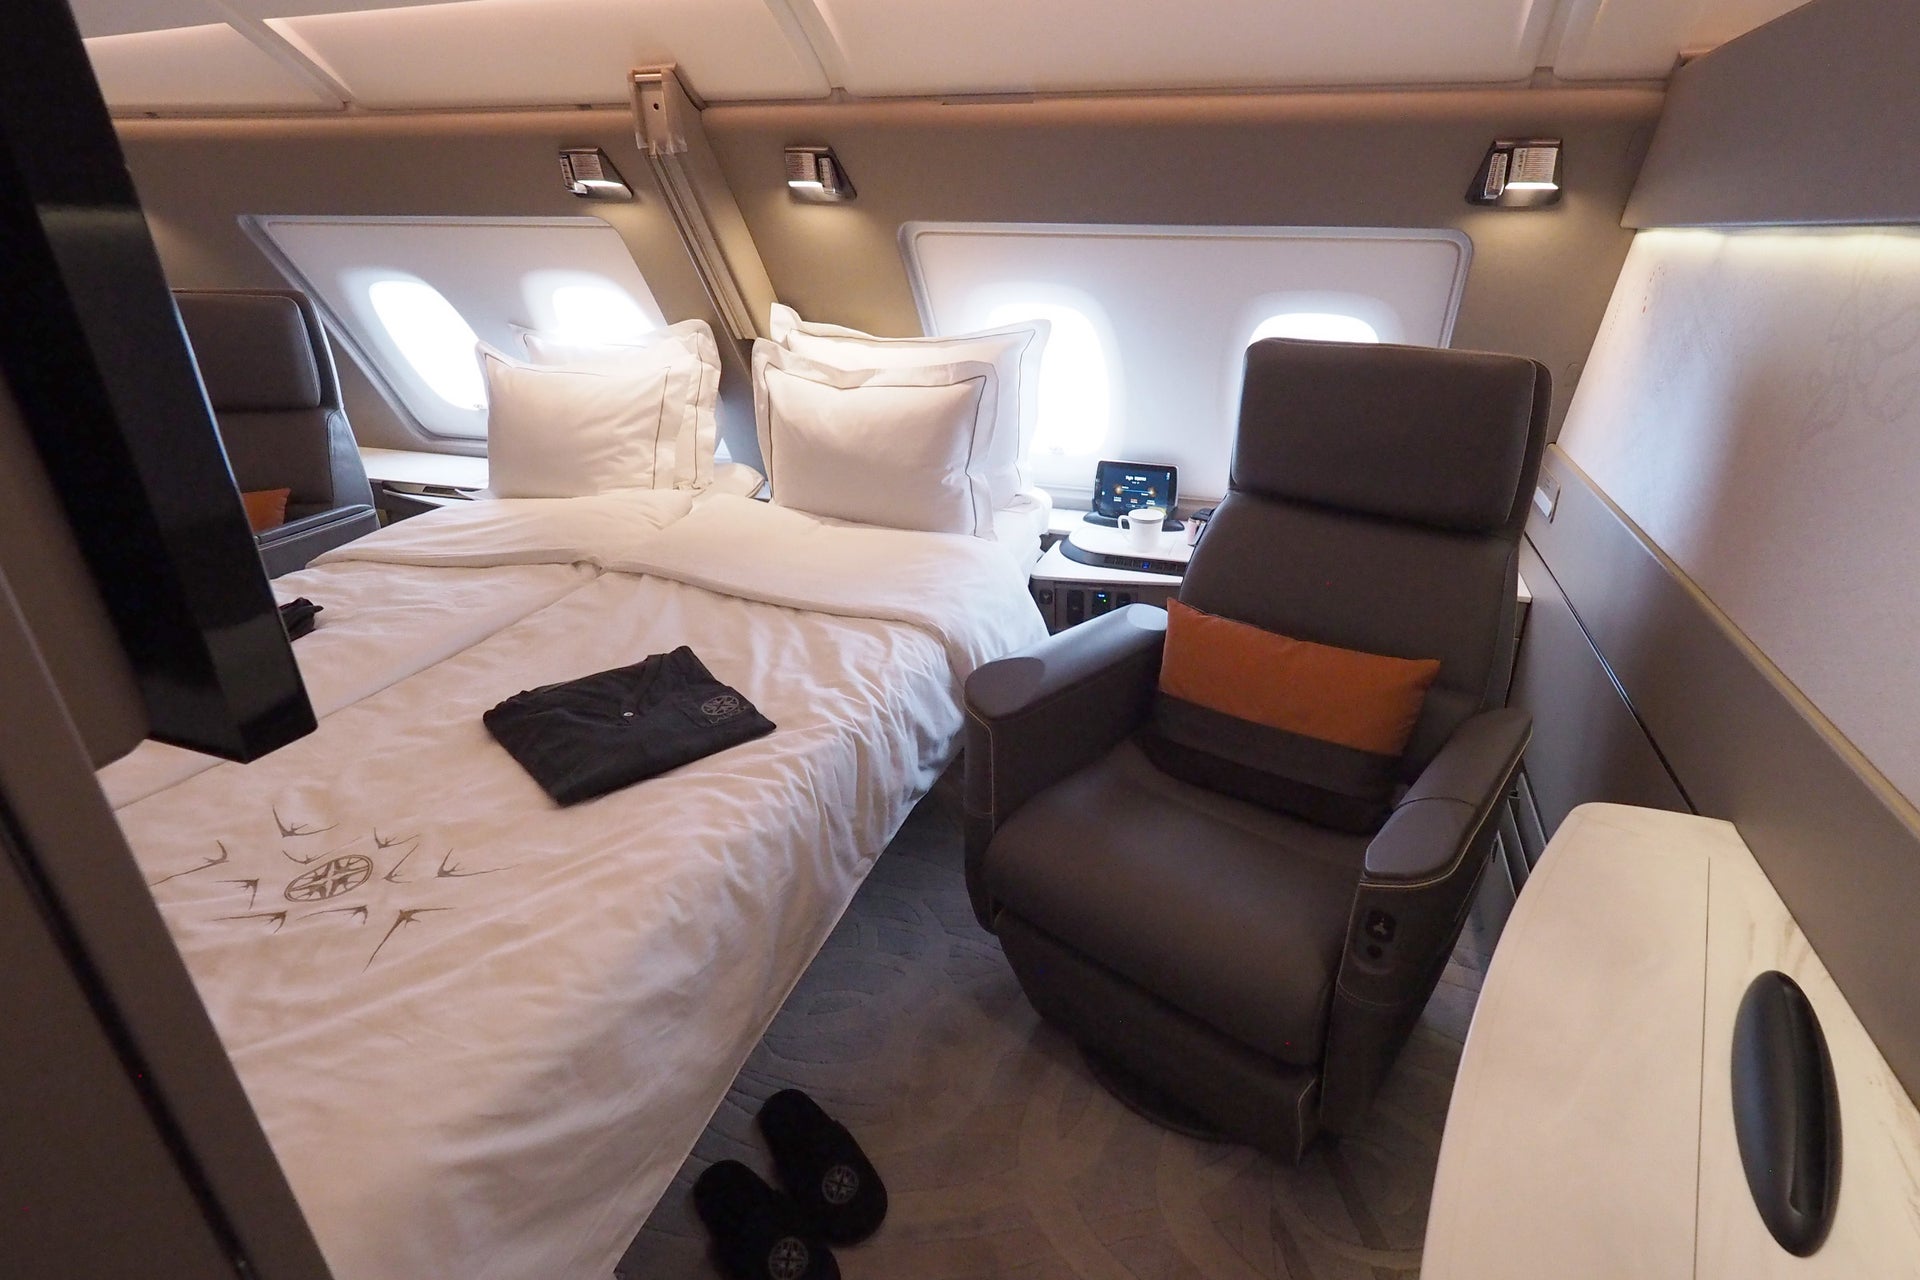 The Best Ways to Book Singapore Airlines First Class - The Points Guy